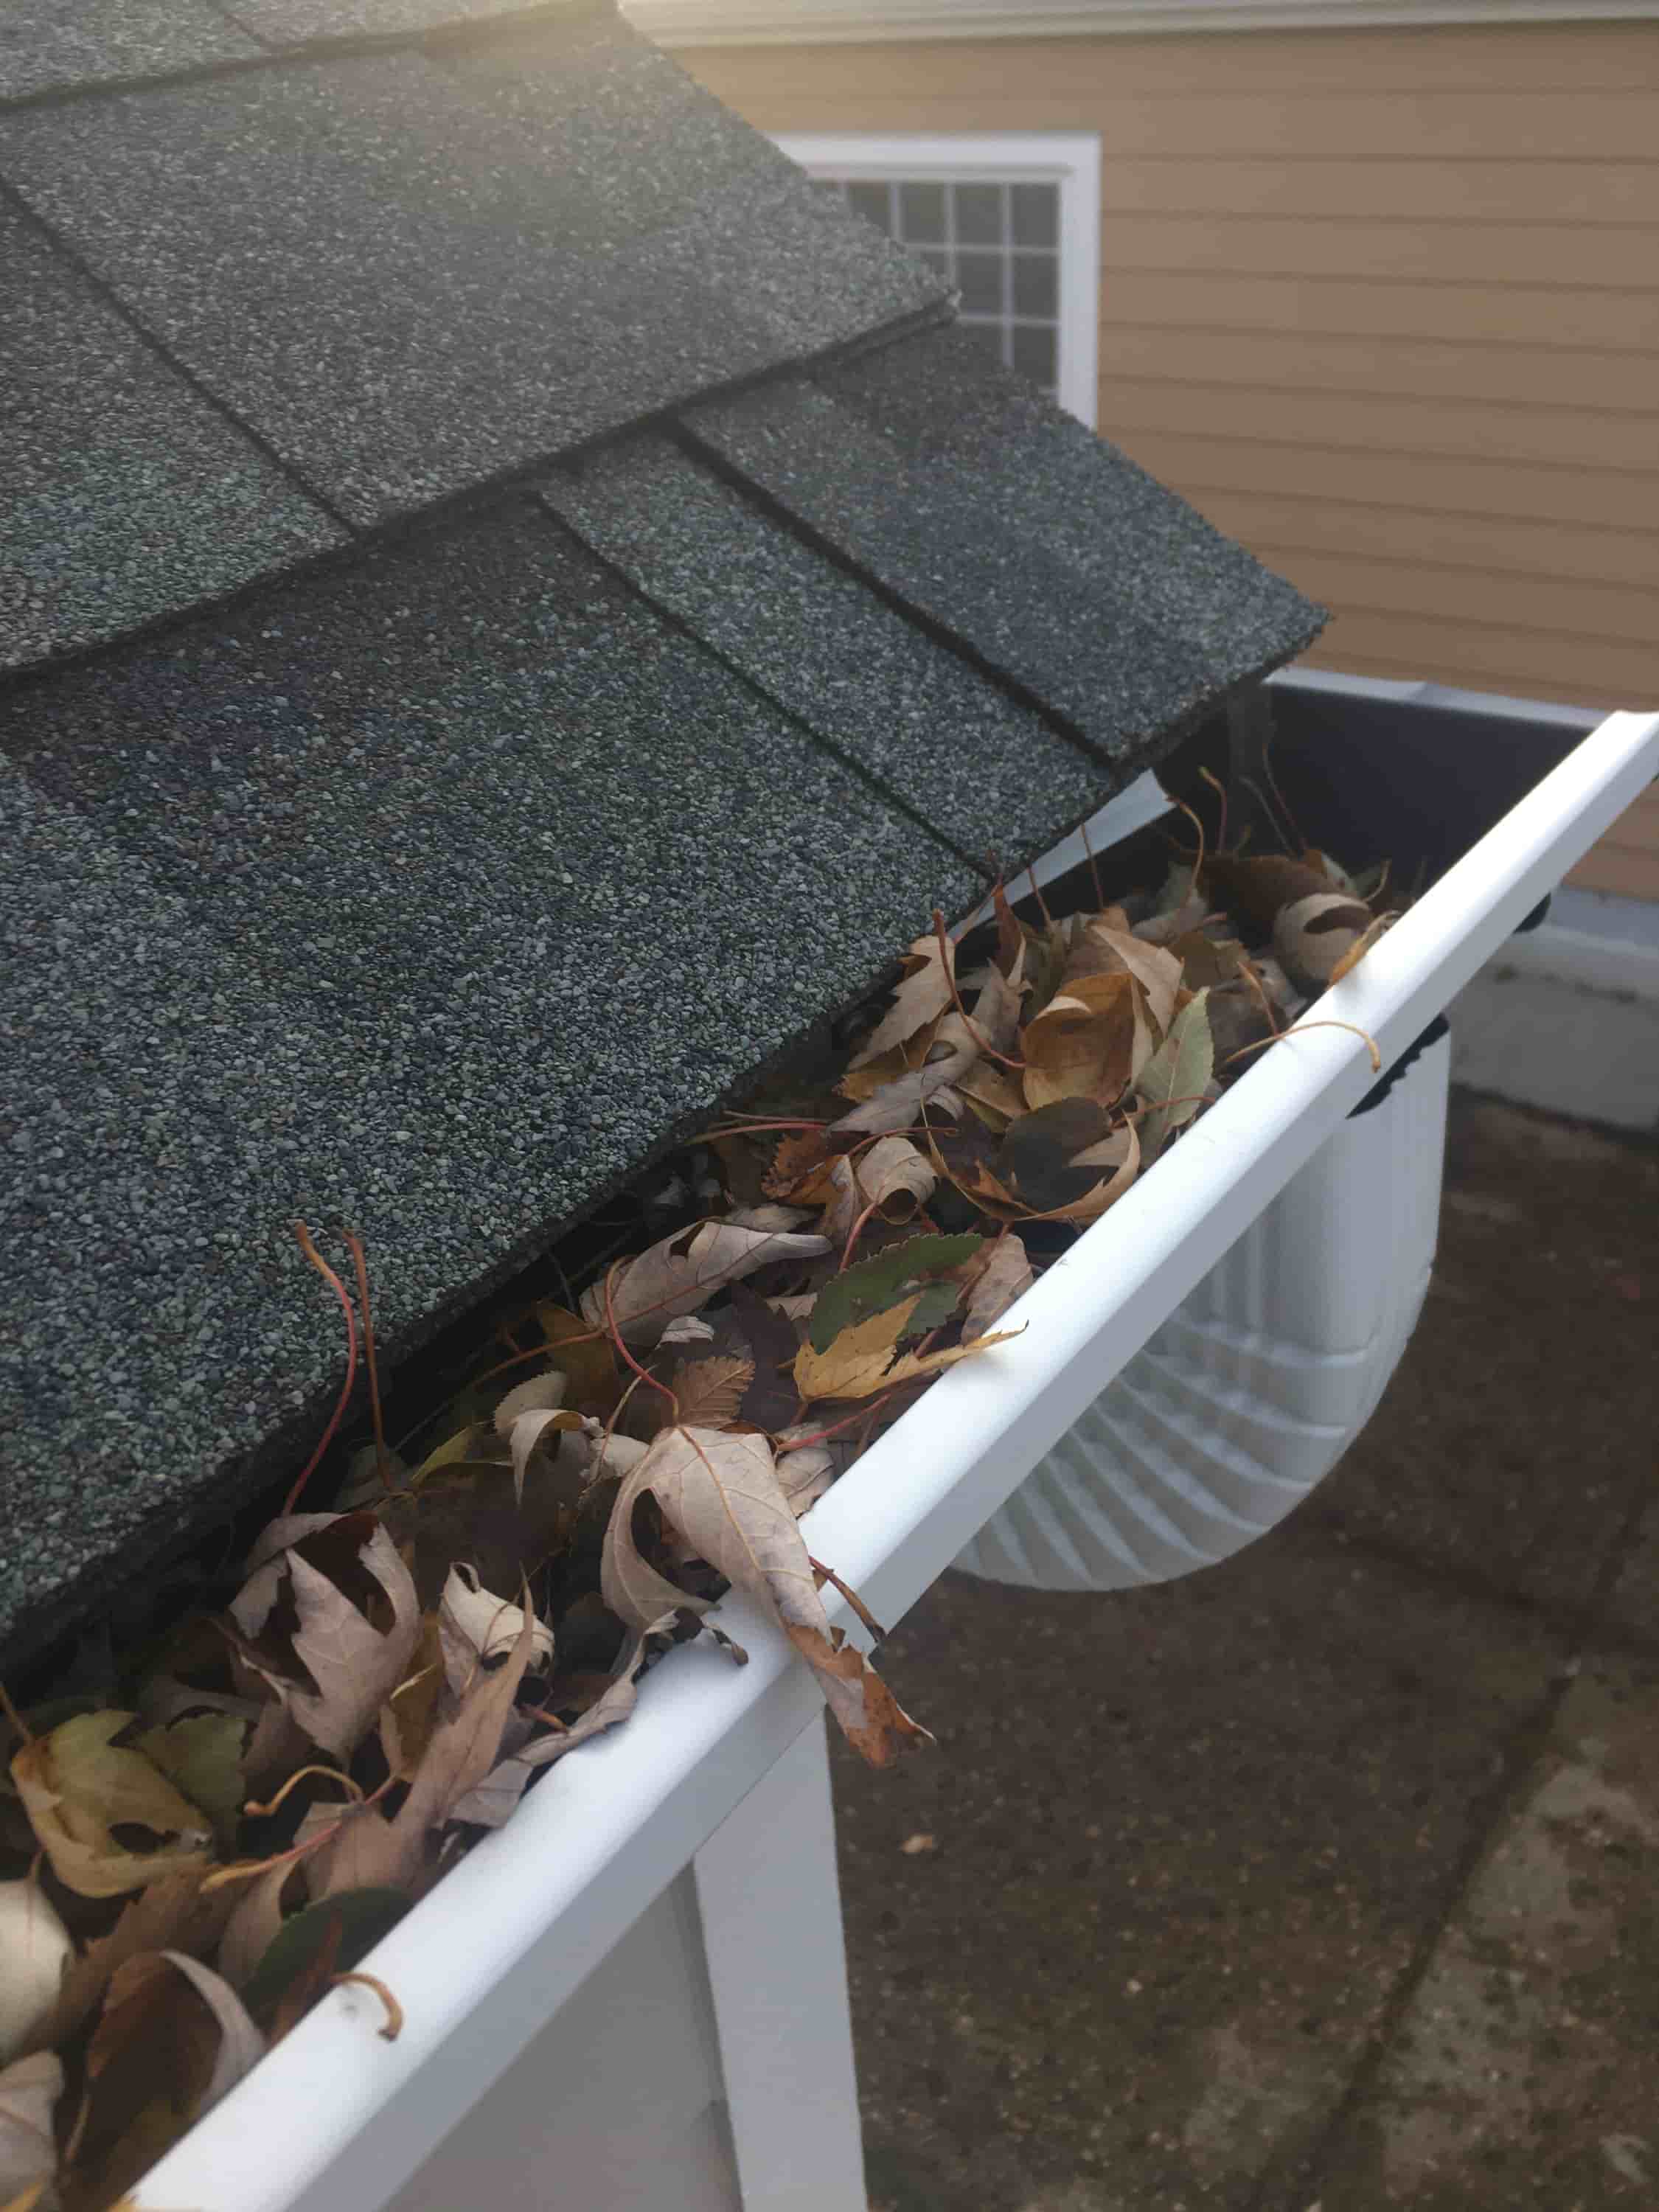 leaf blower attachment to clean gutters